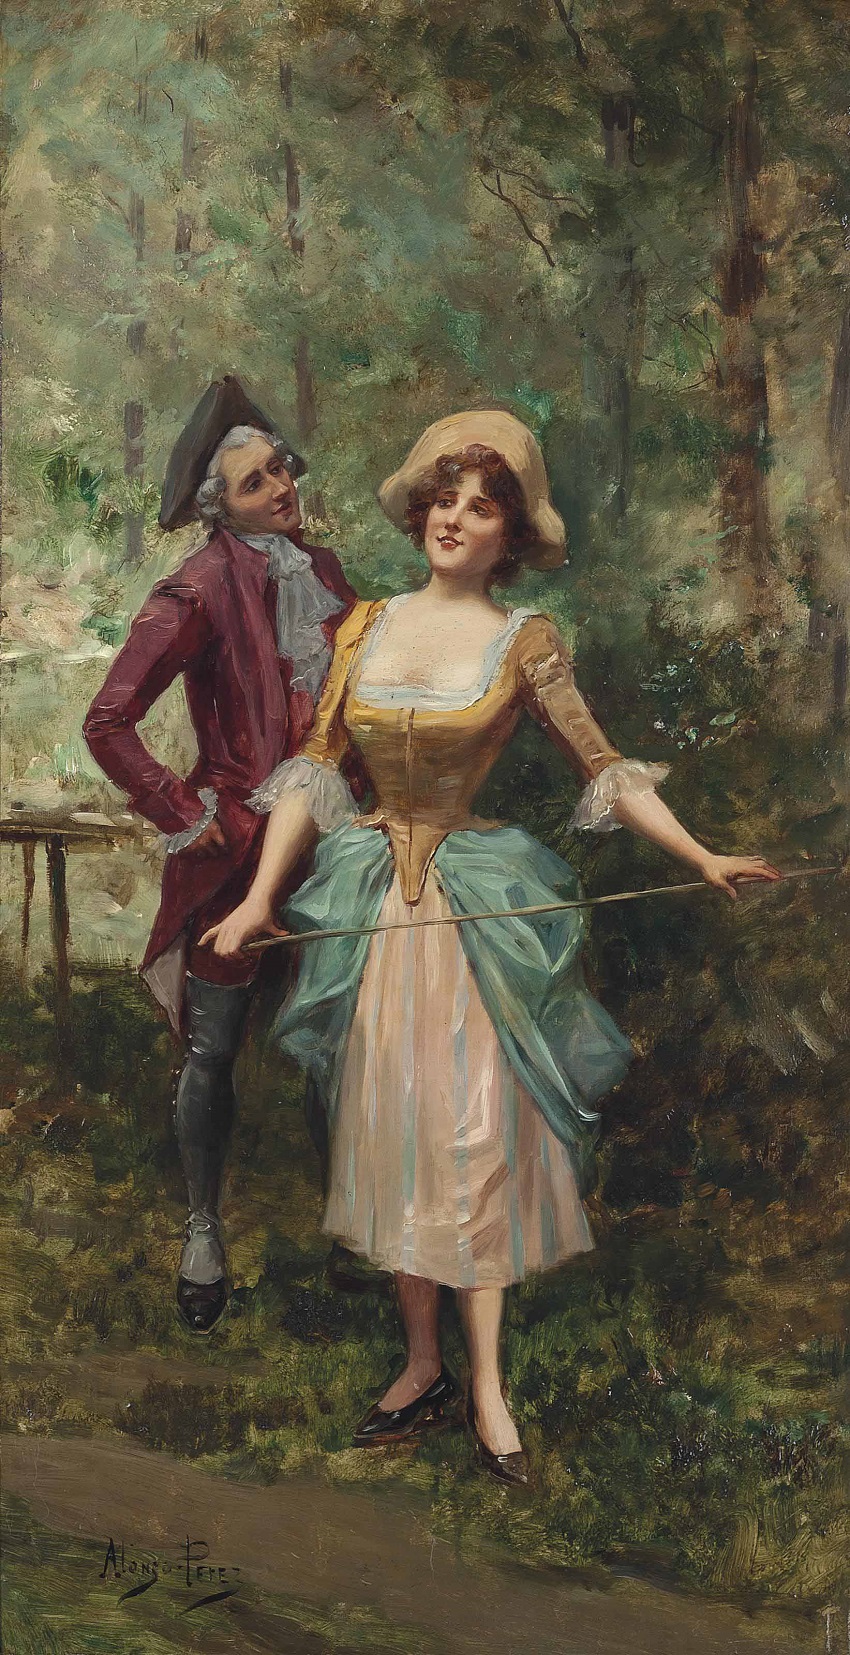 The courtship